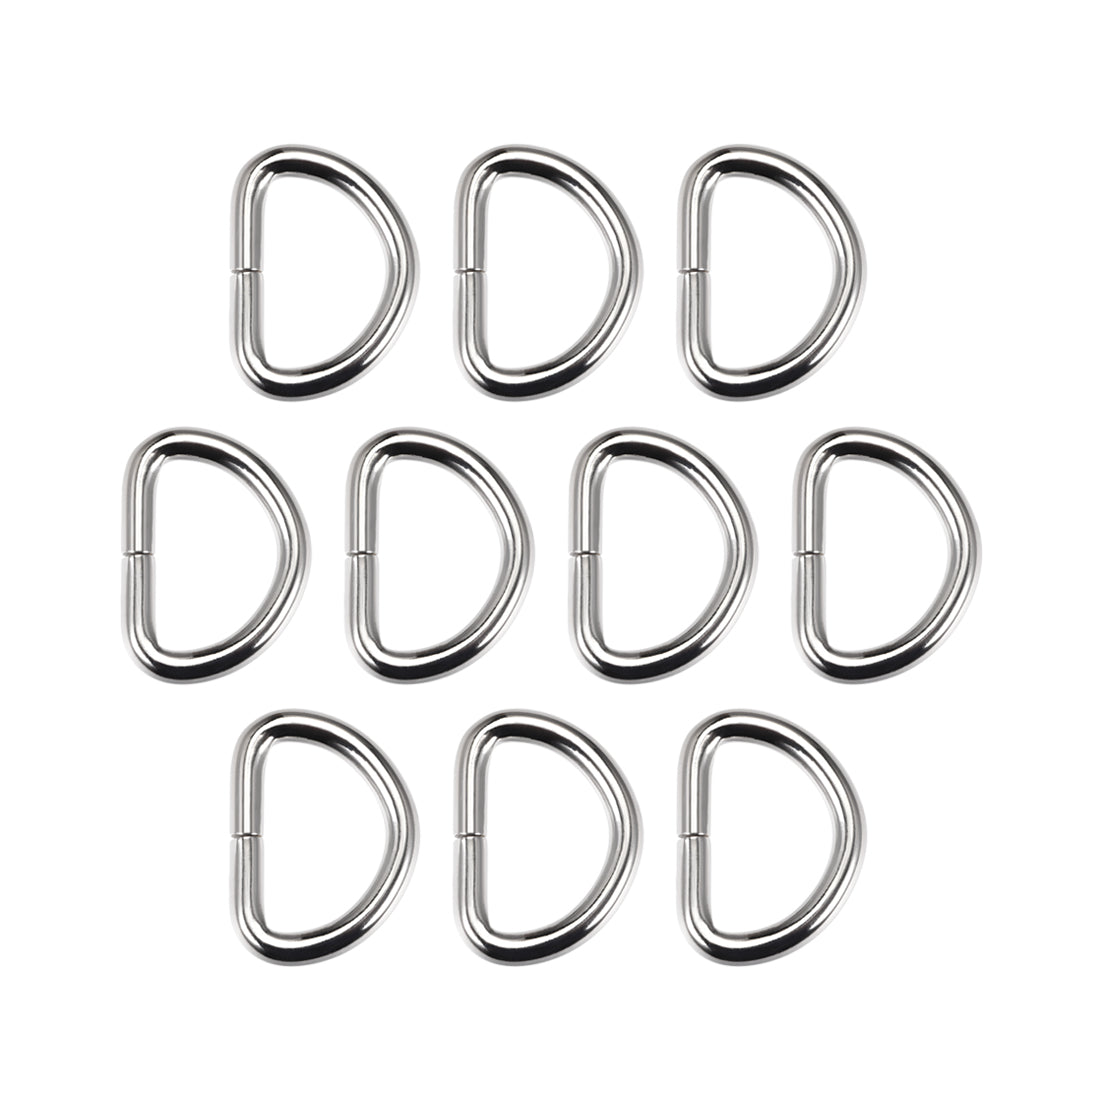 uxcell Uxcell 10 Pcs D Ring Buckle 1 Inch Metal Semi-Circular D-Rings Silver Tone 4.6mm Thickness for Hardware Bags Belts Craft DIY Accessories